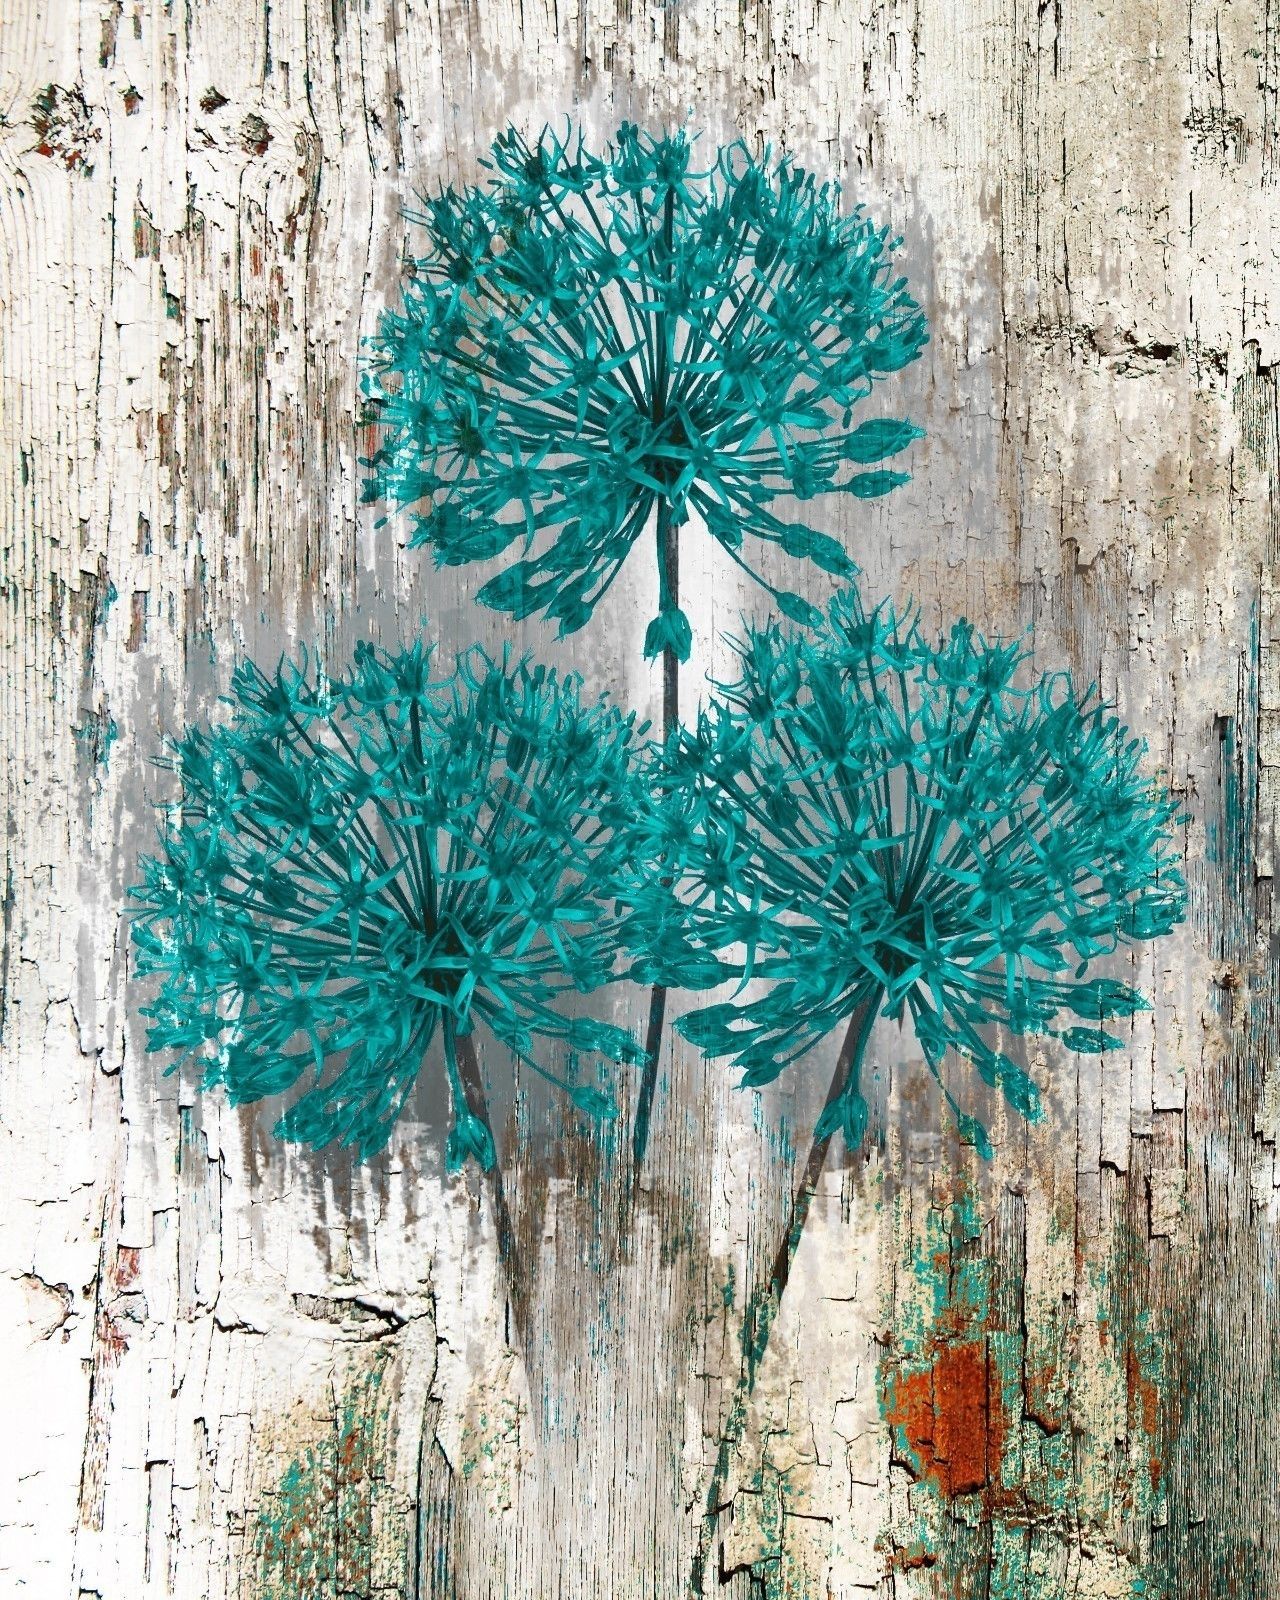 Teal Brown Rustic Distressed Flower Wall Art Home Decor Matted Throughout Teal And Brown Wall Art (View 7 of 20)